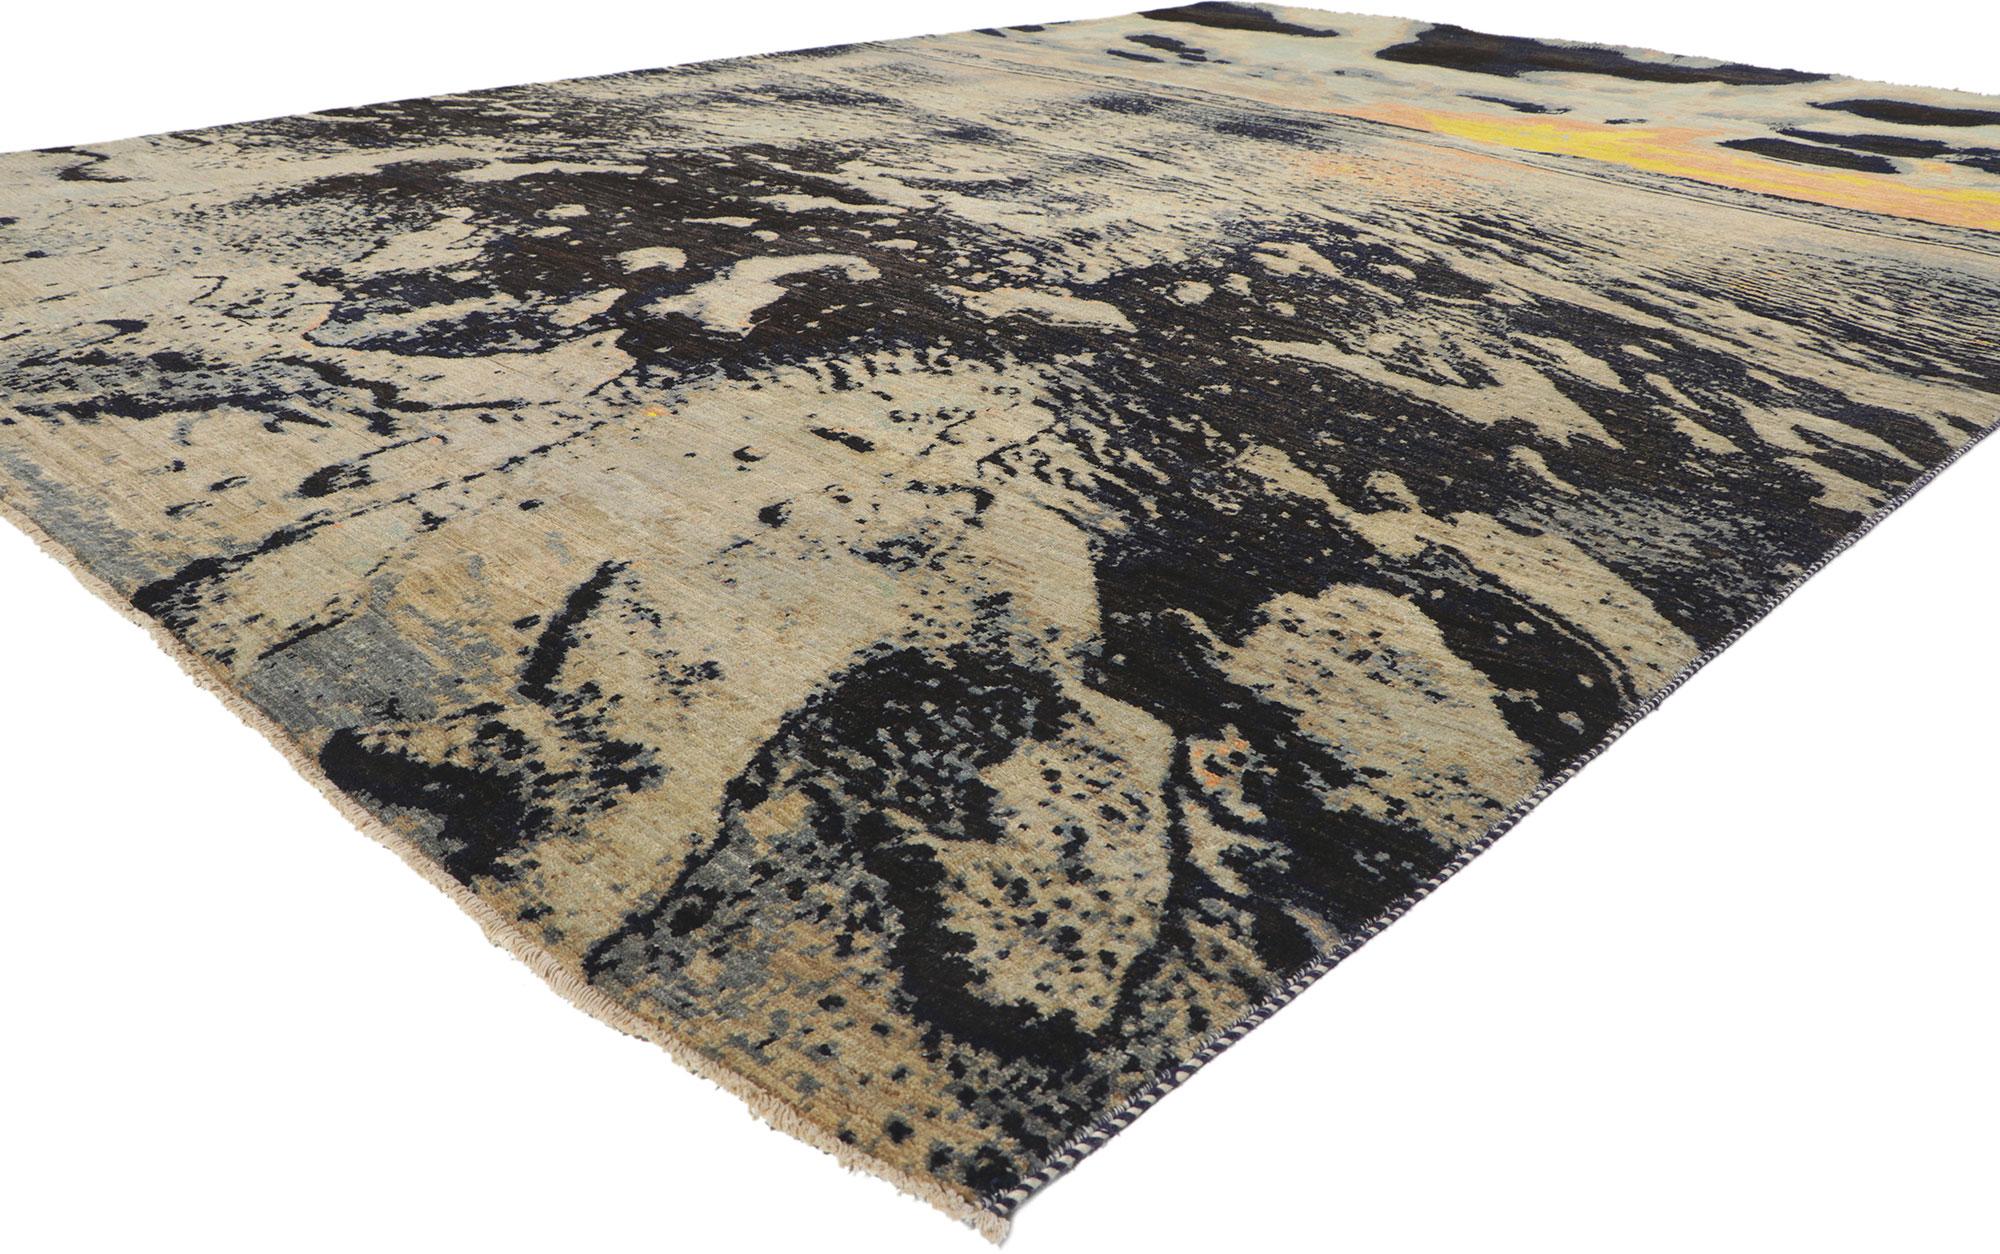 80751 New Contemporary Seascape Pictorial Rug Inspired by Claude Monet, 09'11 x 14'00. Inspired by beach sunsets over the ocean, this hand-knotted wool contemporary area rug is a captivating vision of woven beauty. The seascape pictorial and sultry